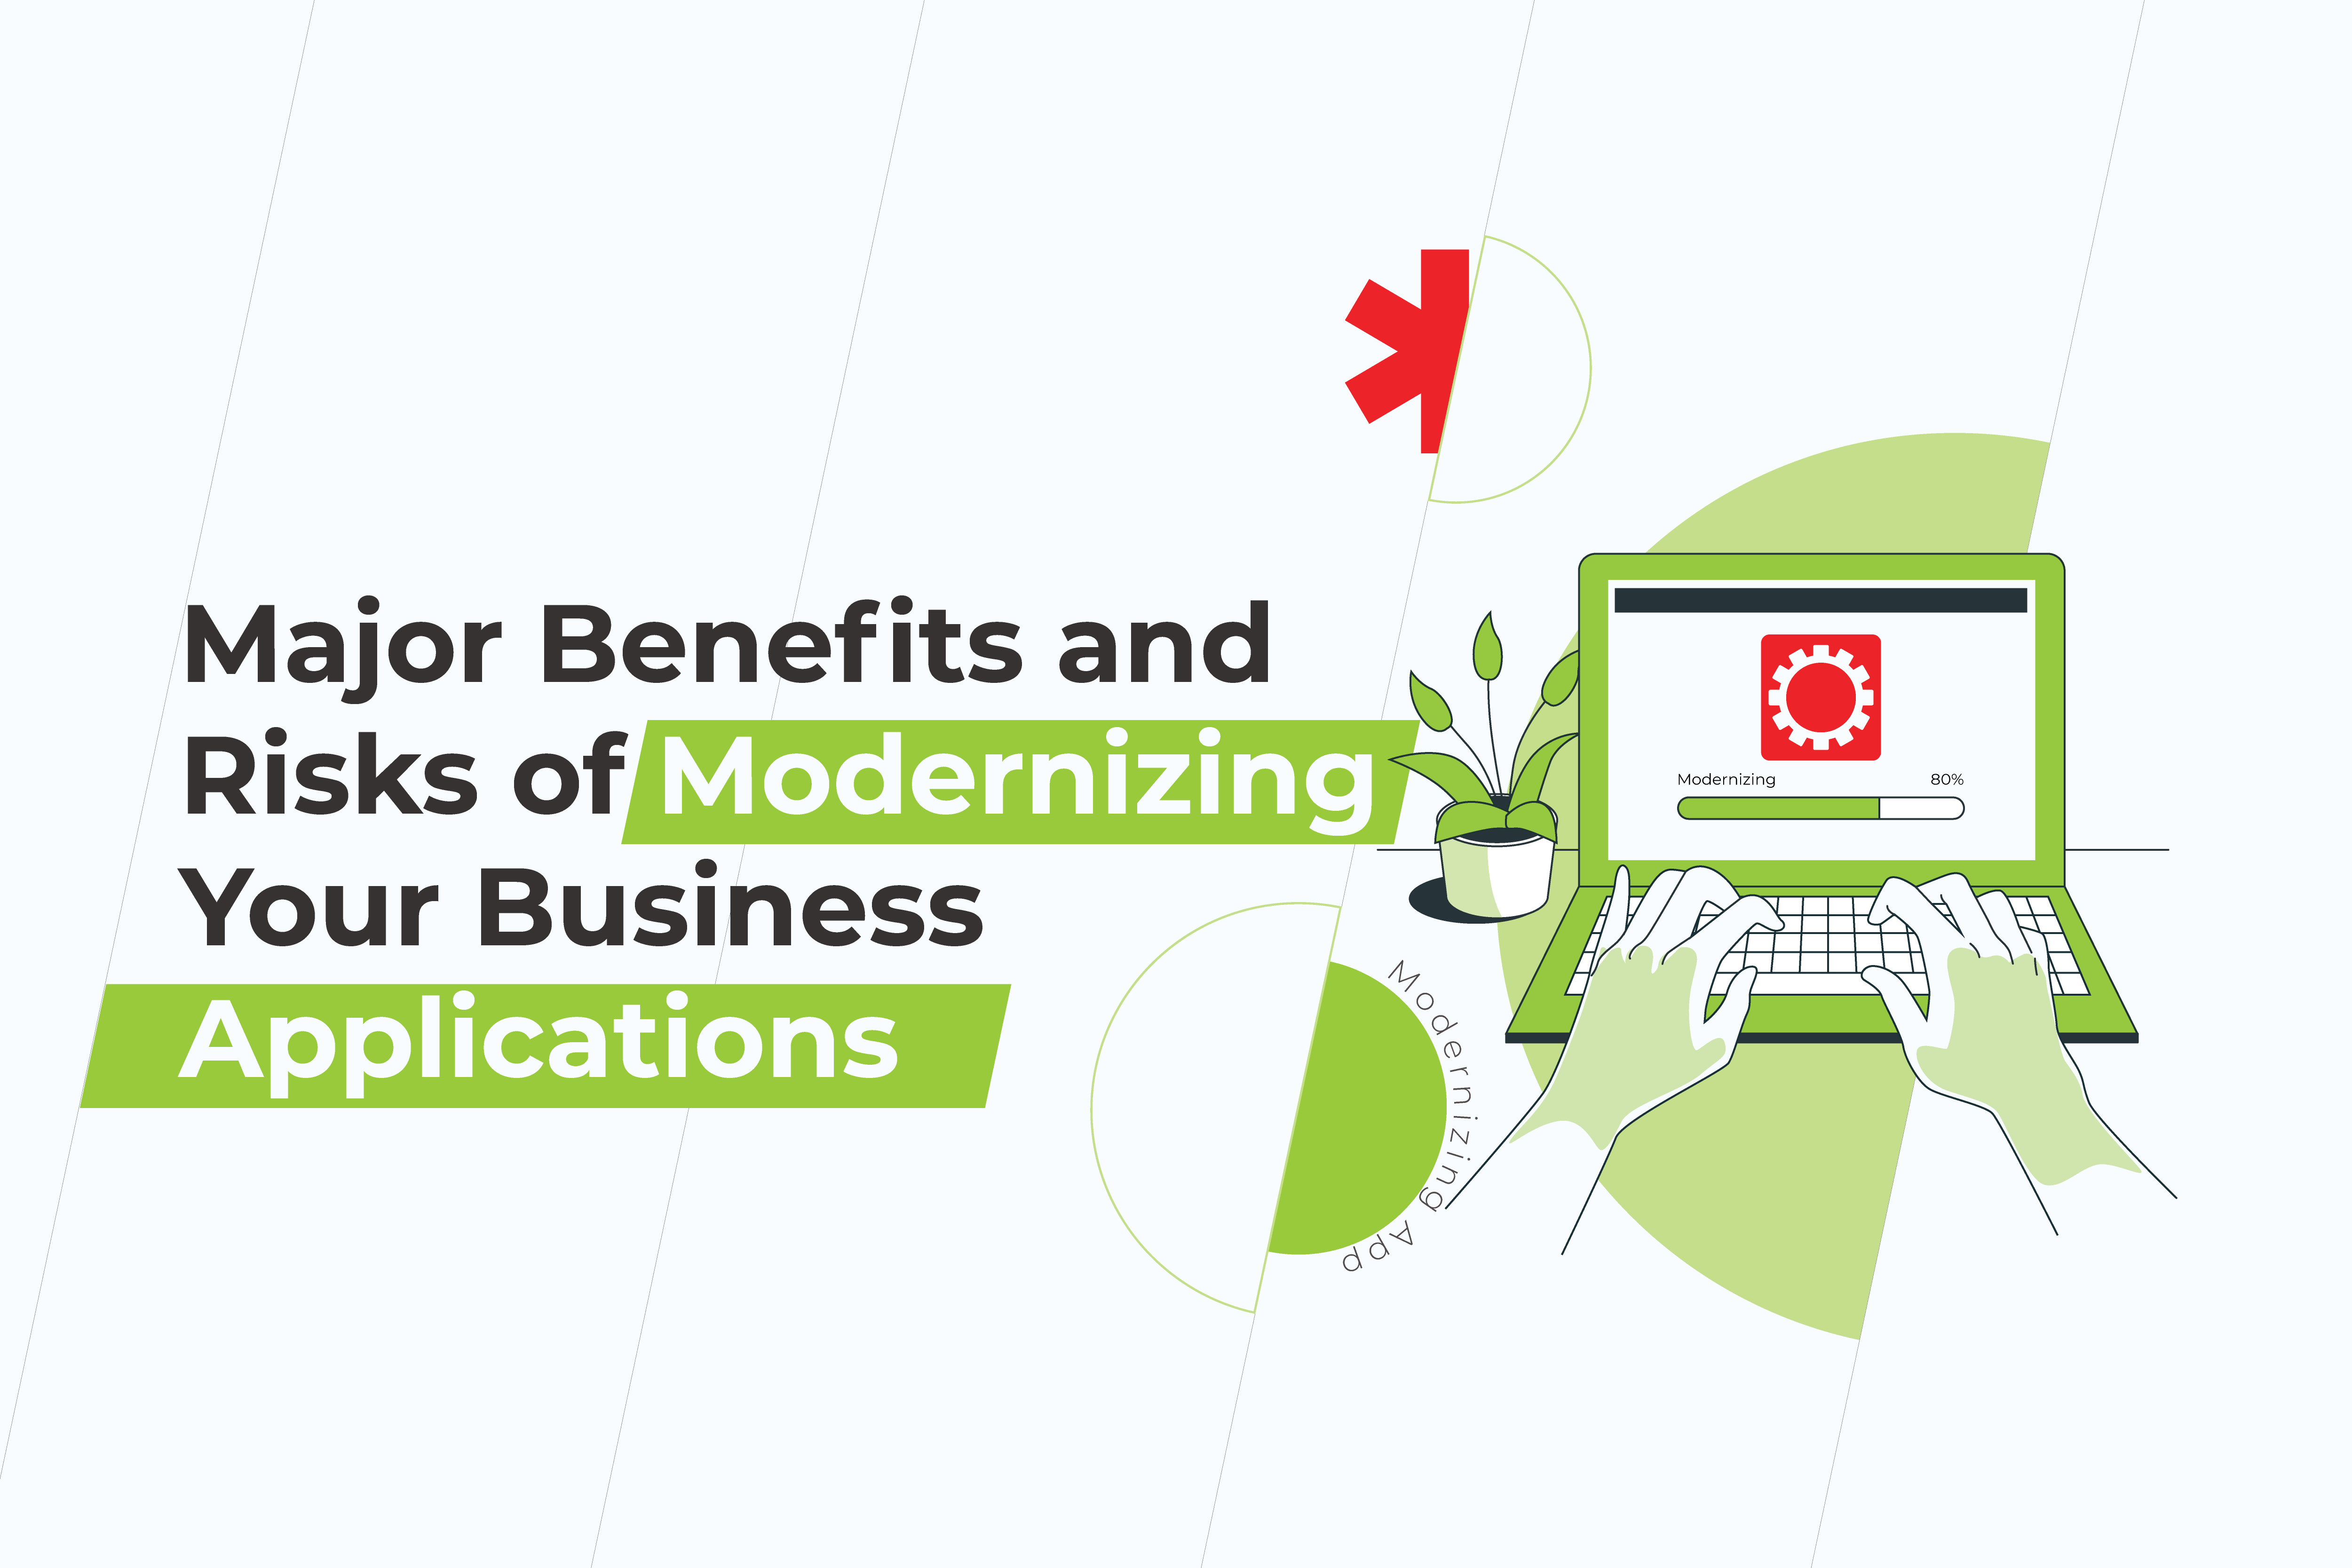 Major benefits and risks of modernizing your business applications